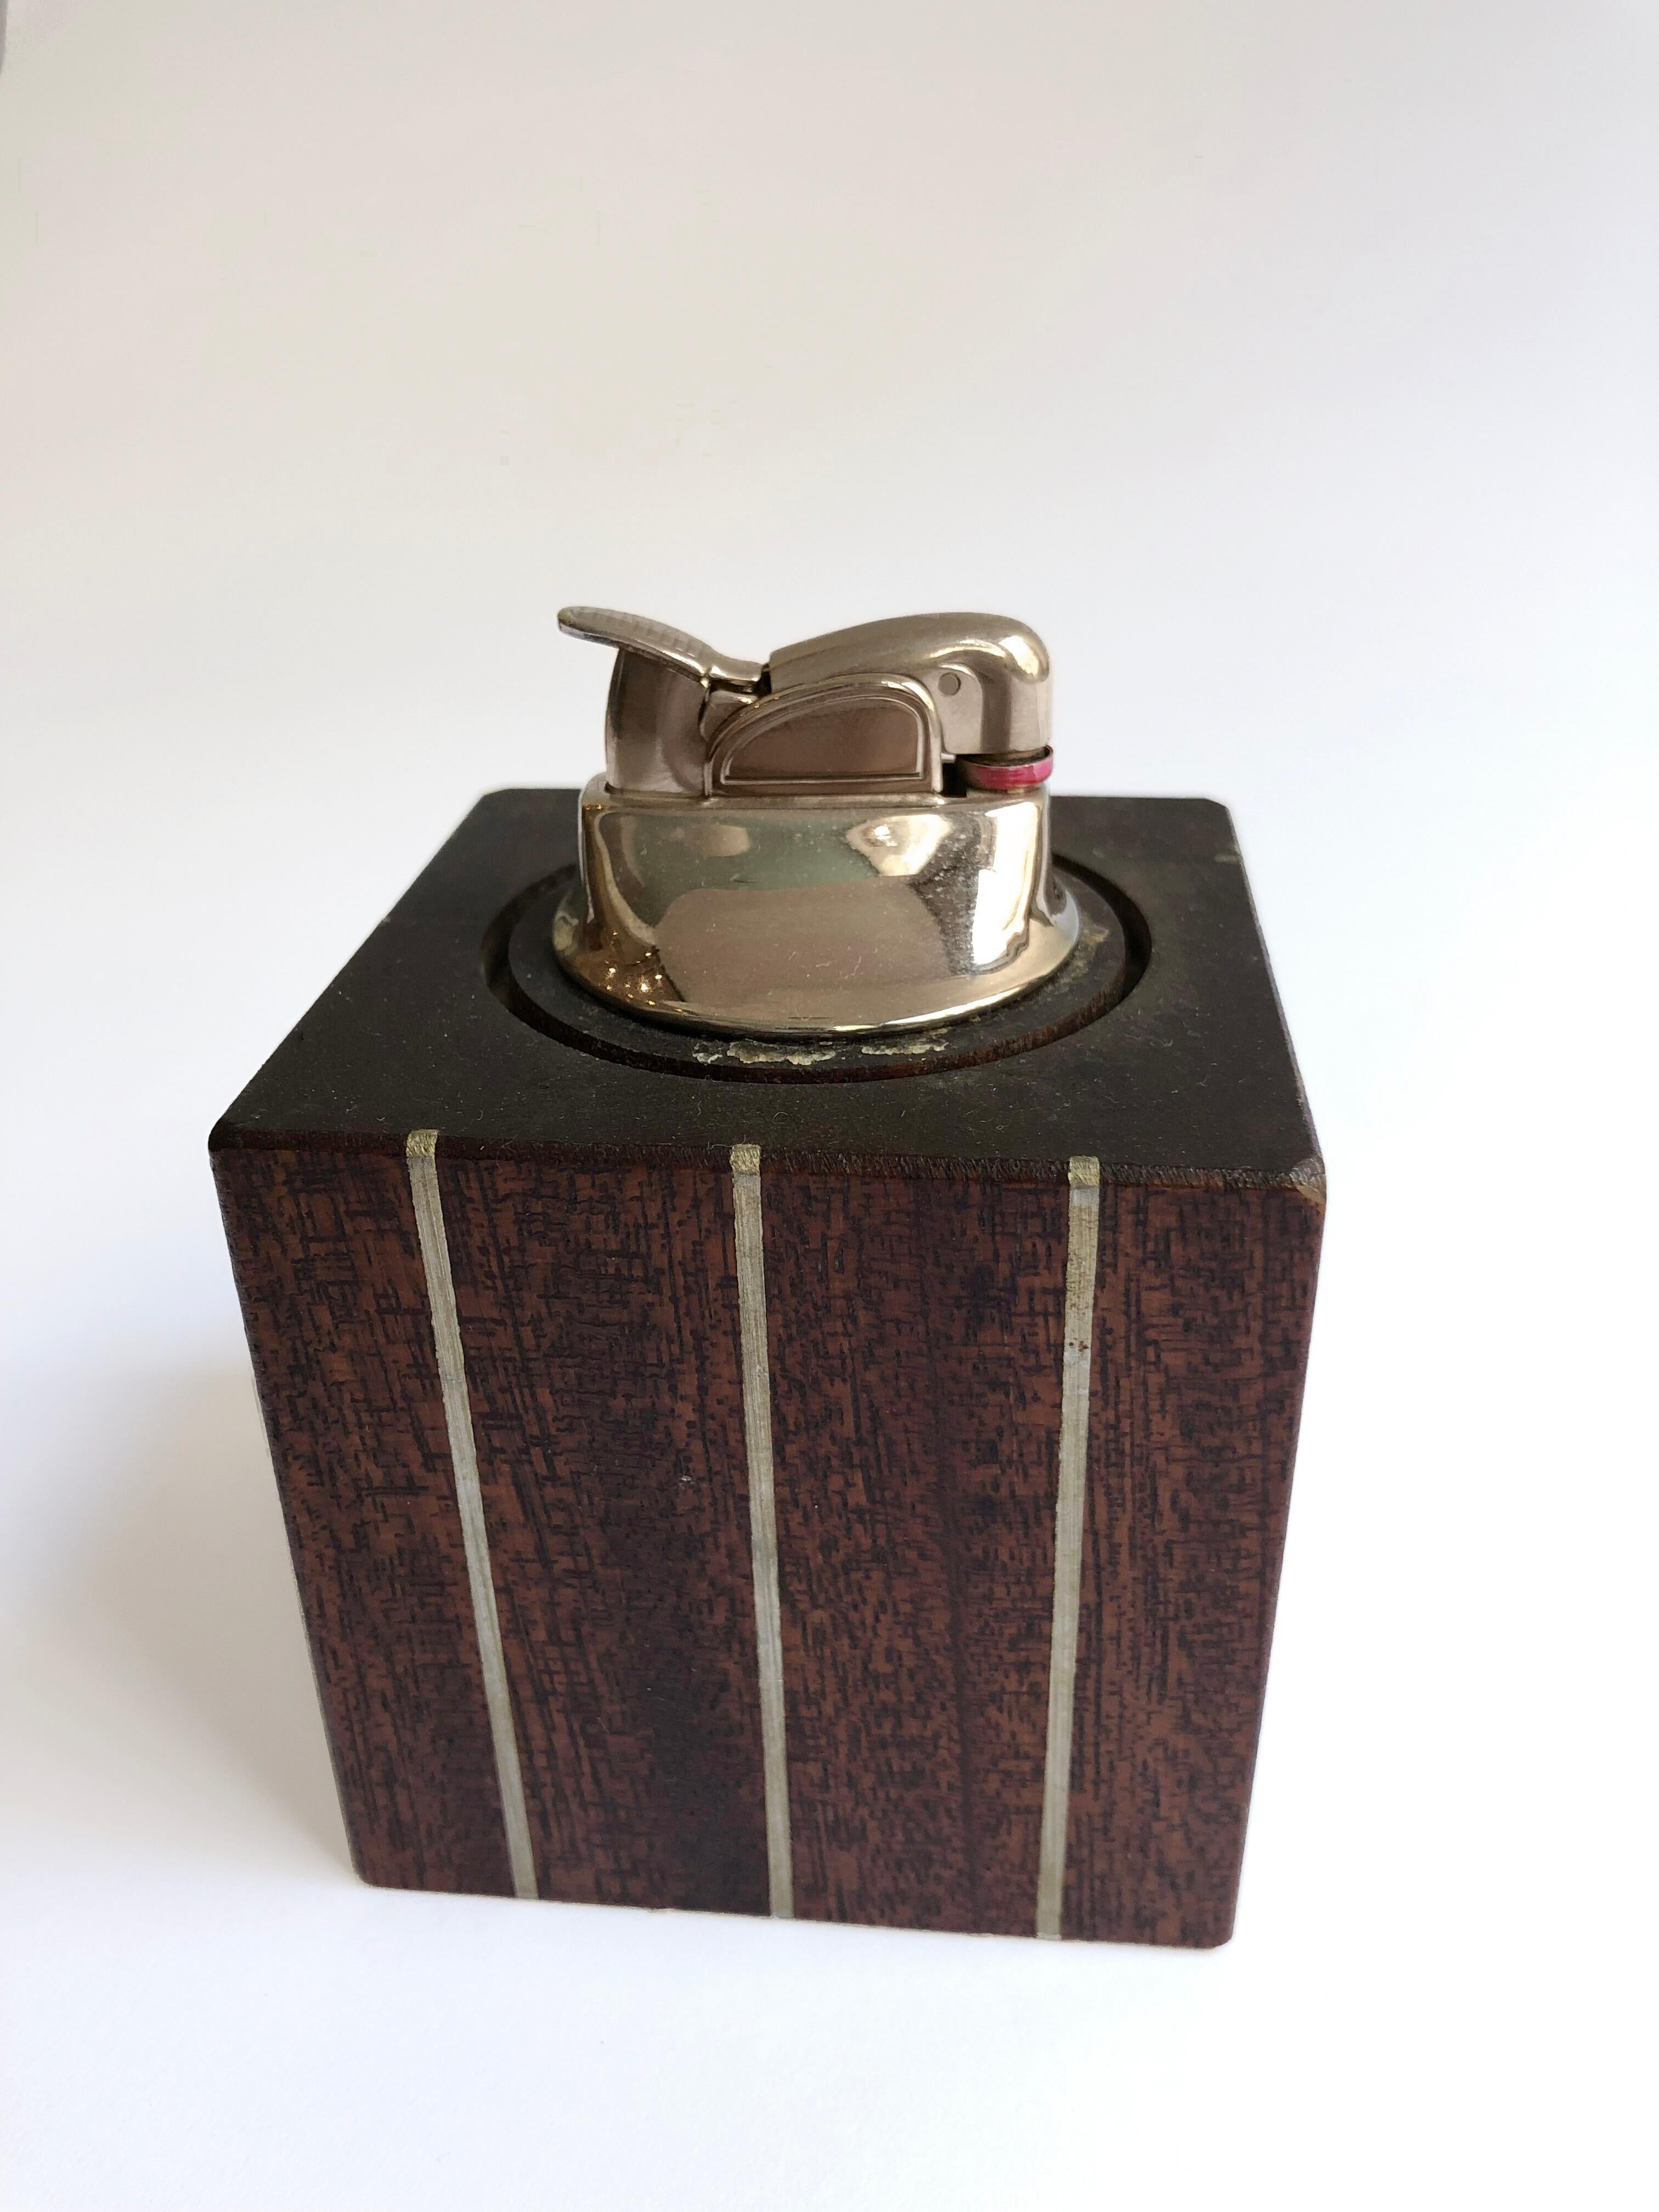 Paul Evans smoking set constructed from cuban mahogany and inlayed pewter, with removable pewter cap. Inset petwer plug in base reads 'Designers Inc Paul Evans'.